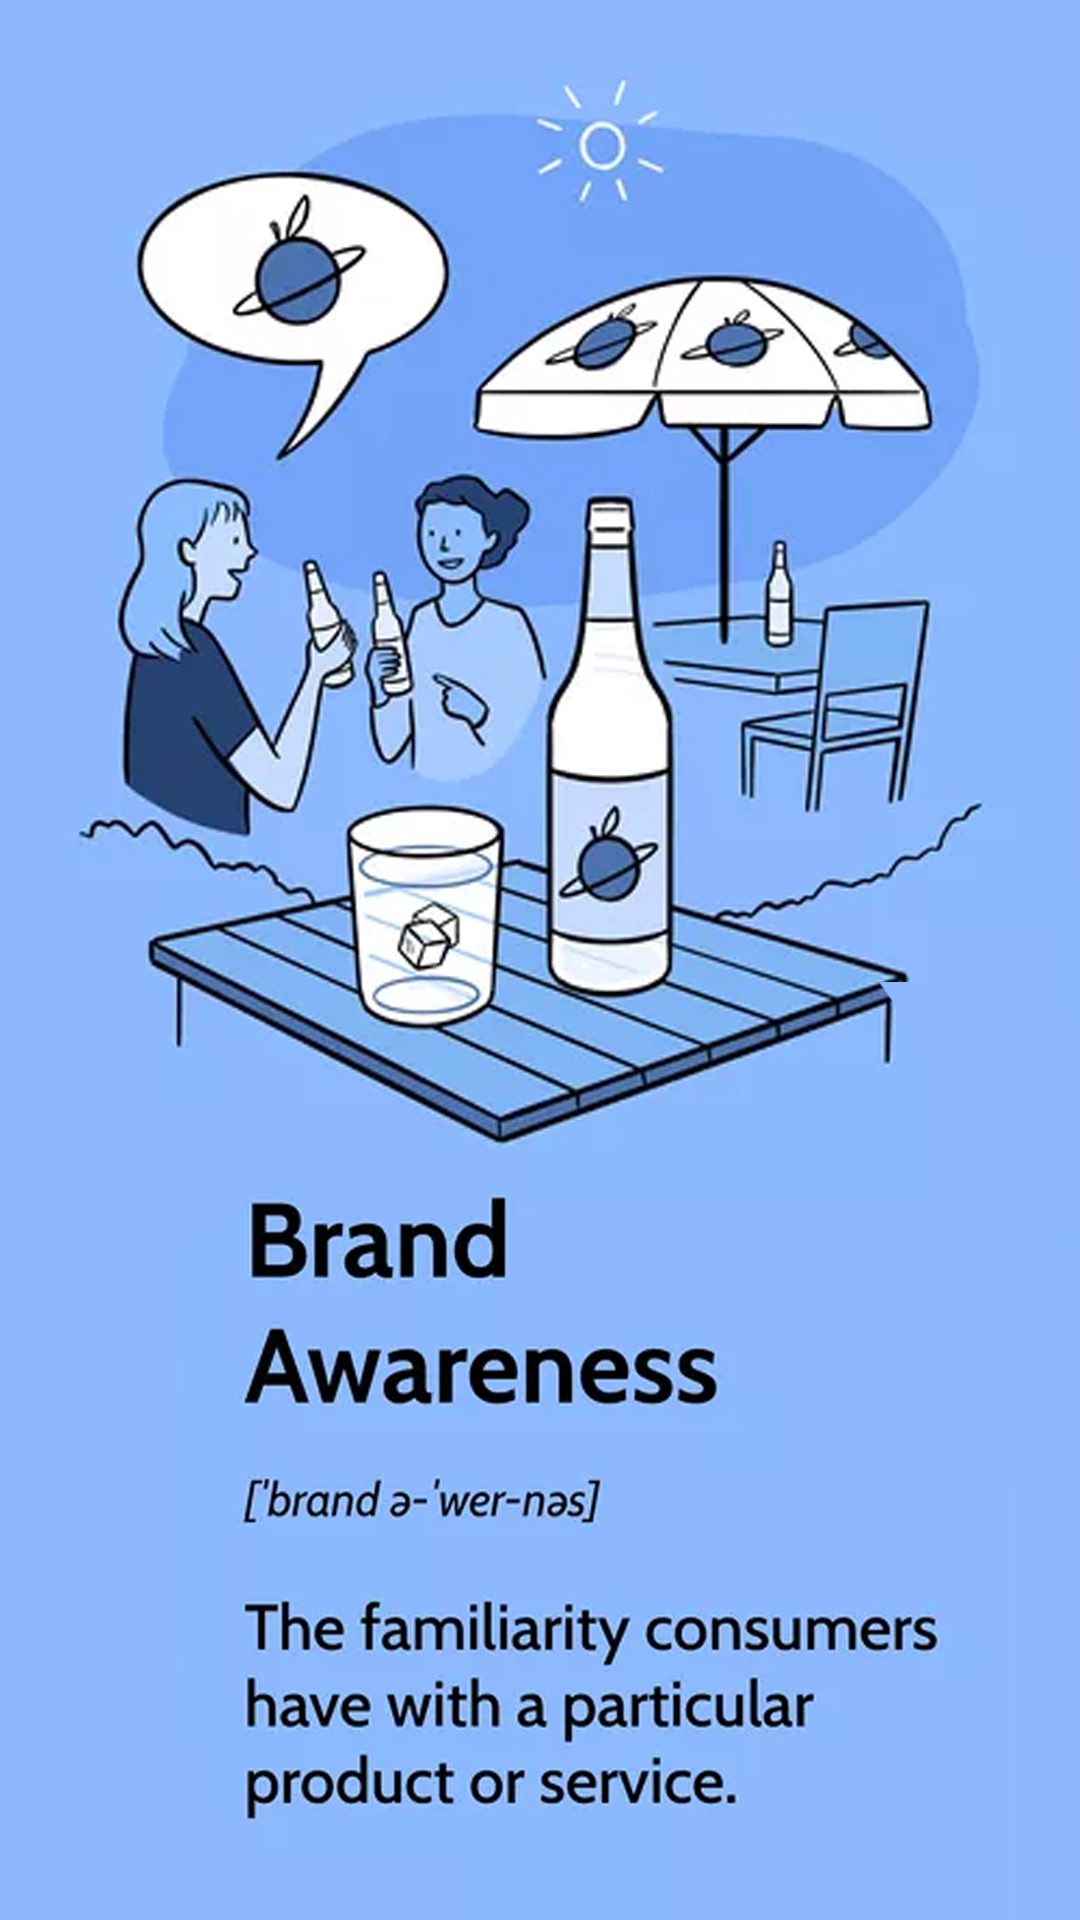 Infographic detailing Brand Awareness as a key Top-of-Funnel Marketing Strategy for engaging potential customers.